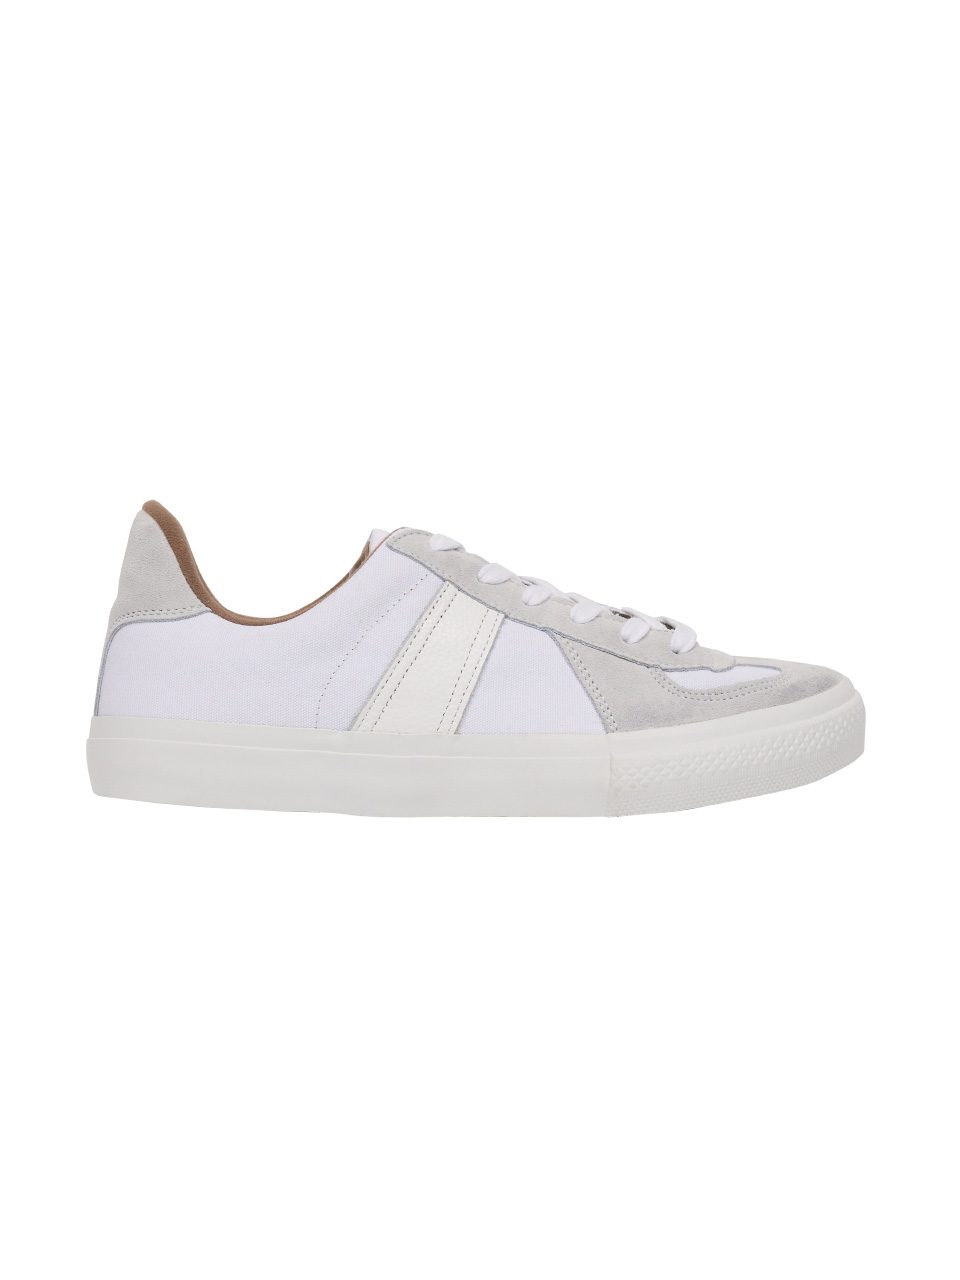 REPRODUCTION OF FOUND - MILITARY TRAINER (WHITE/WHITE)